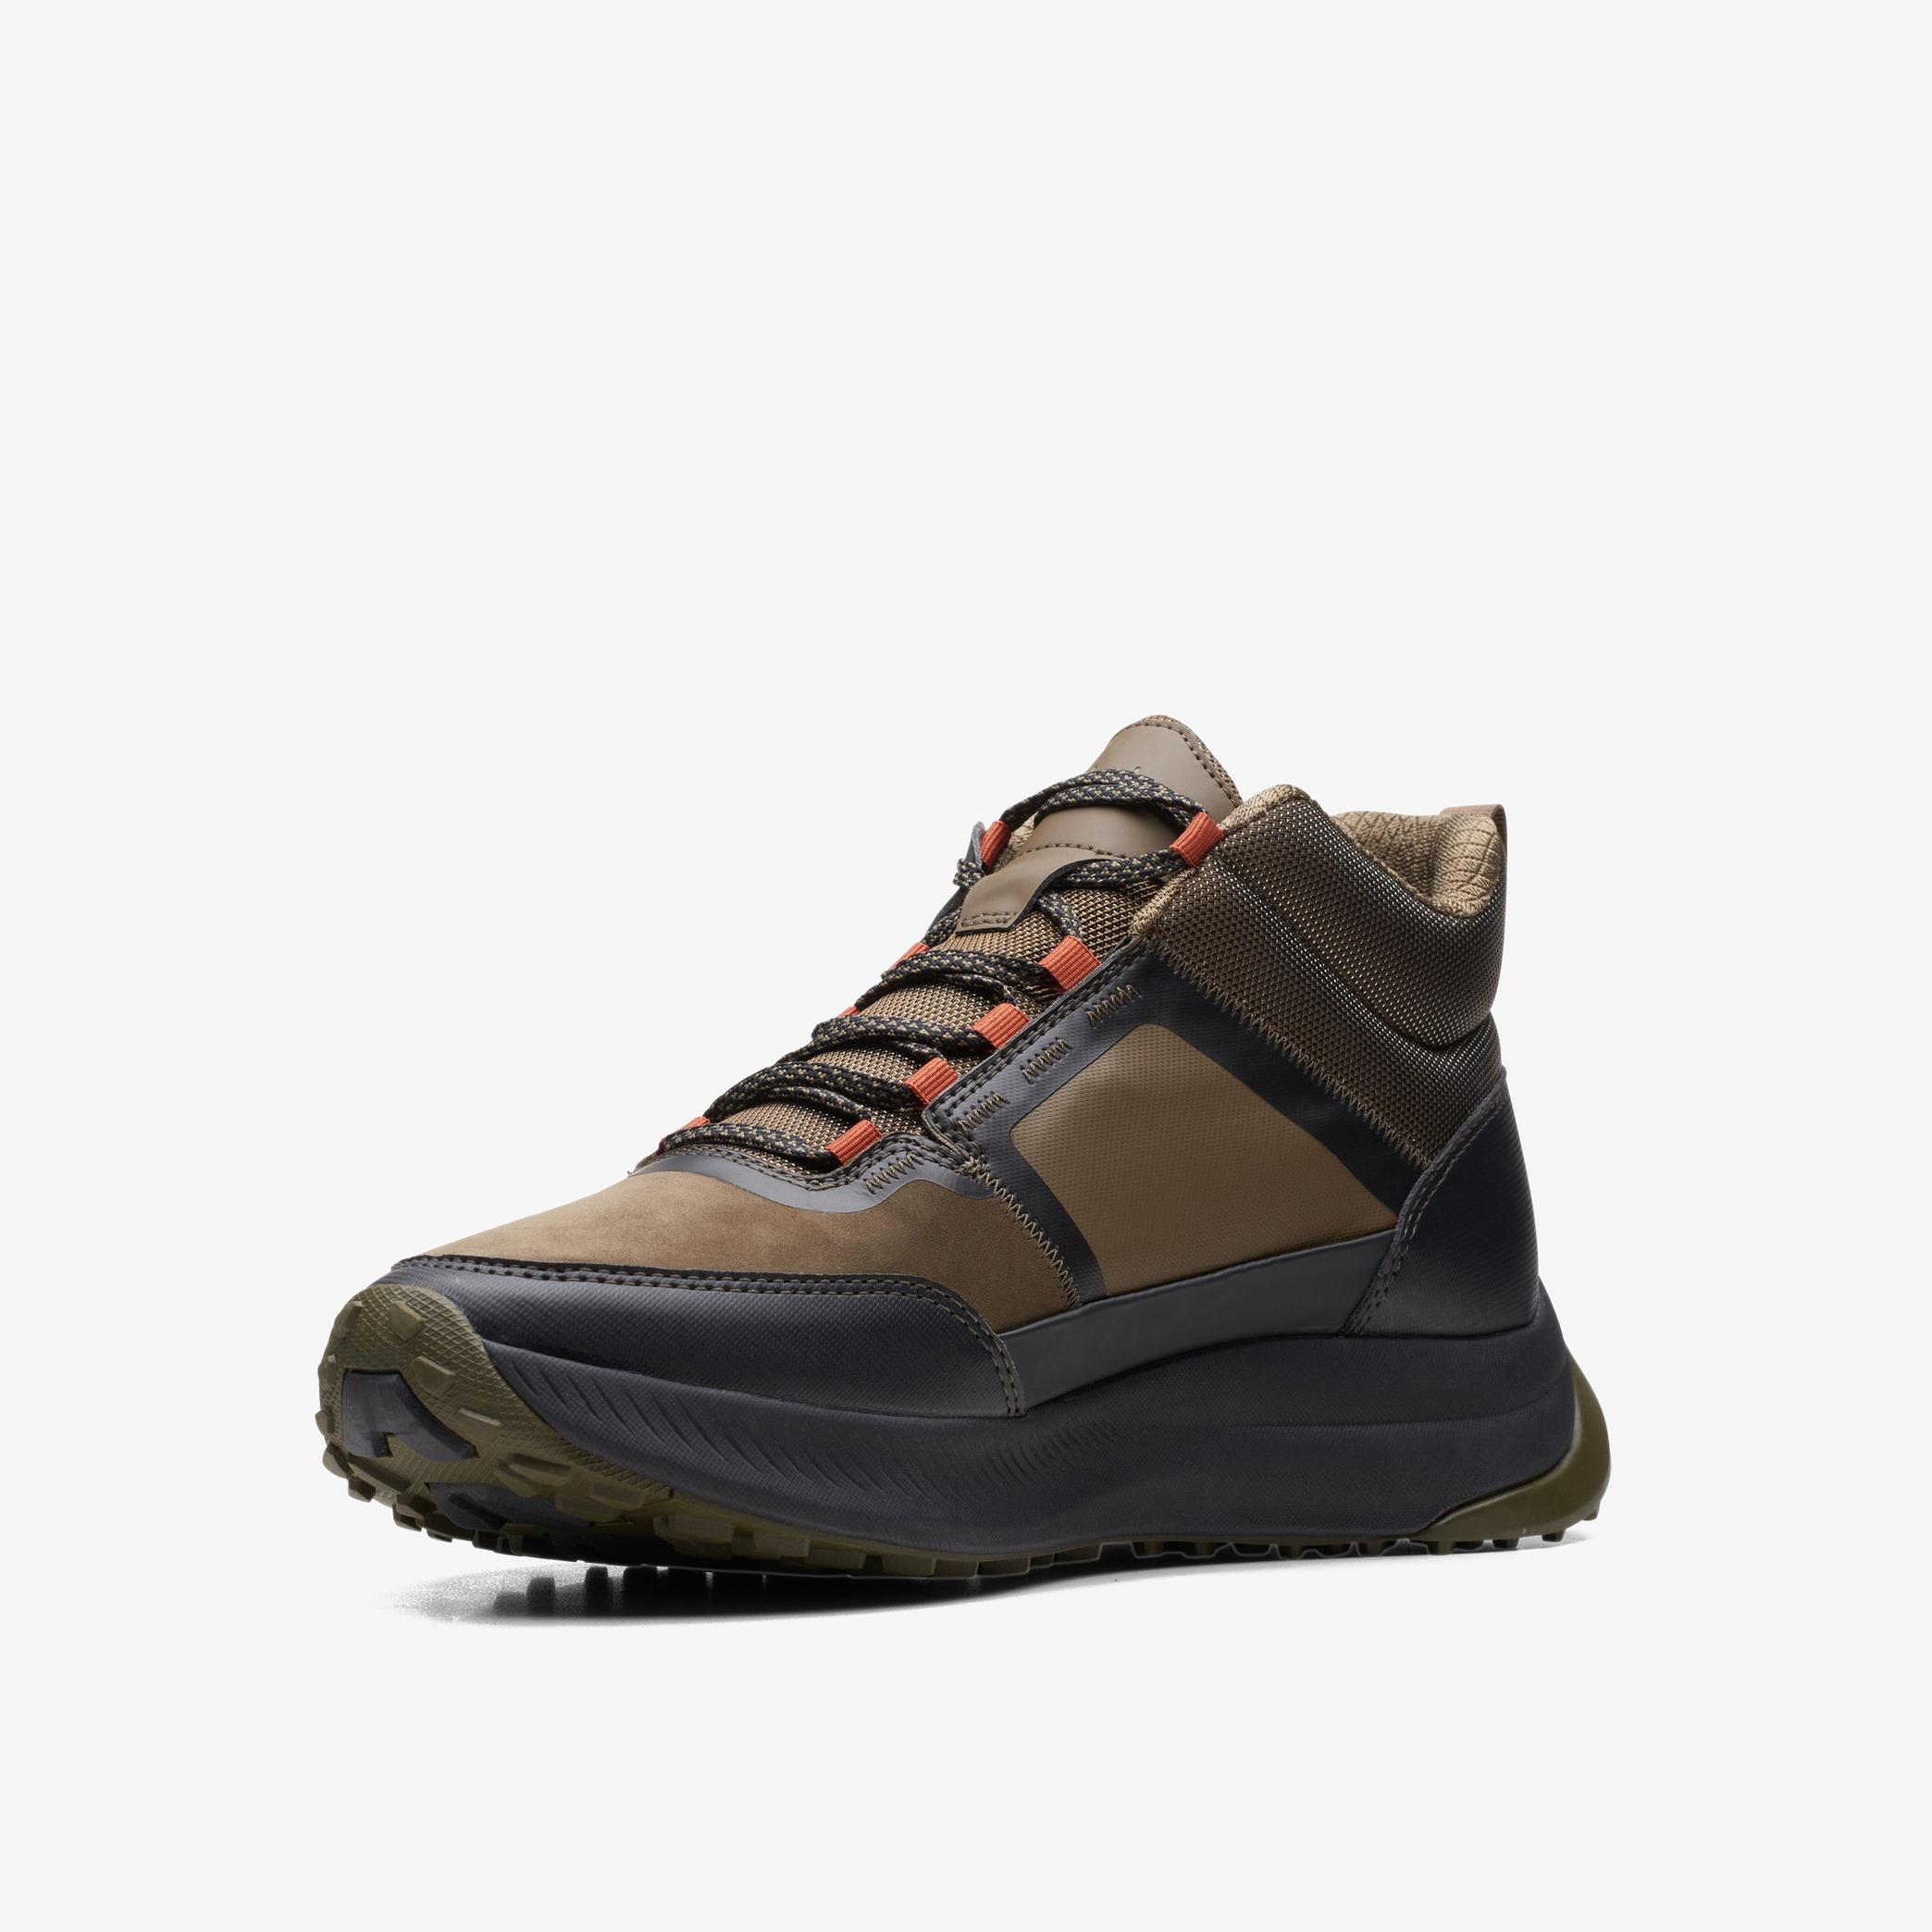 ATL Trail Lace Waterproof Dark Olive Combination Trainers, view 4 of 6